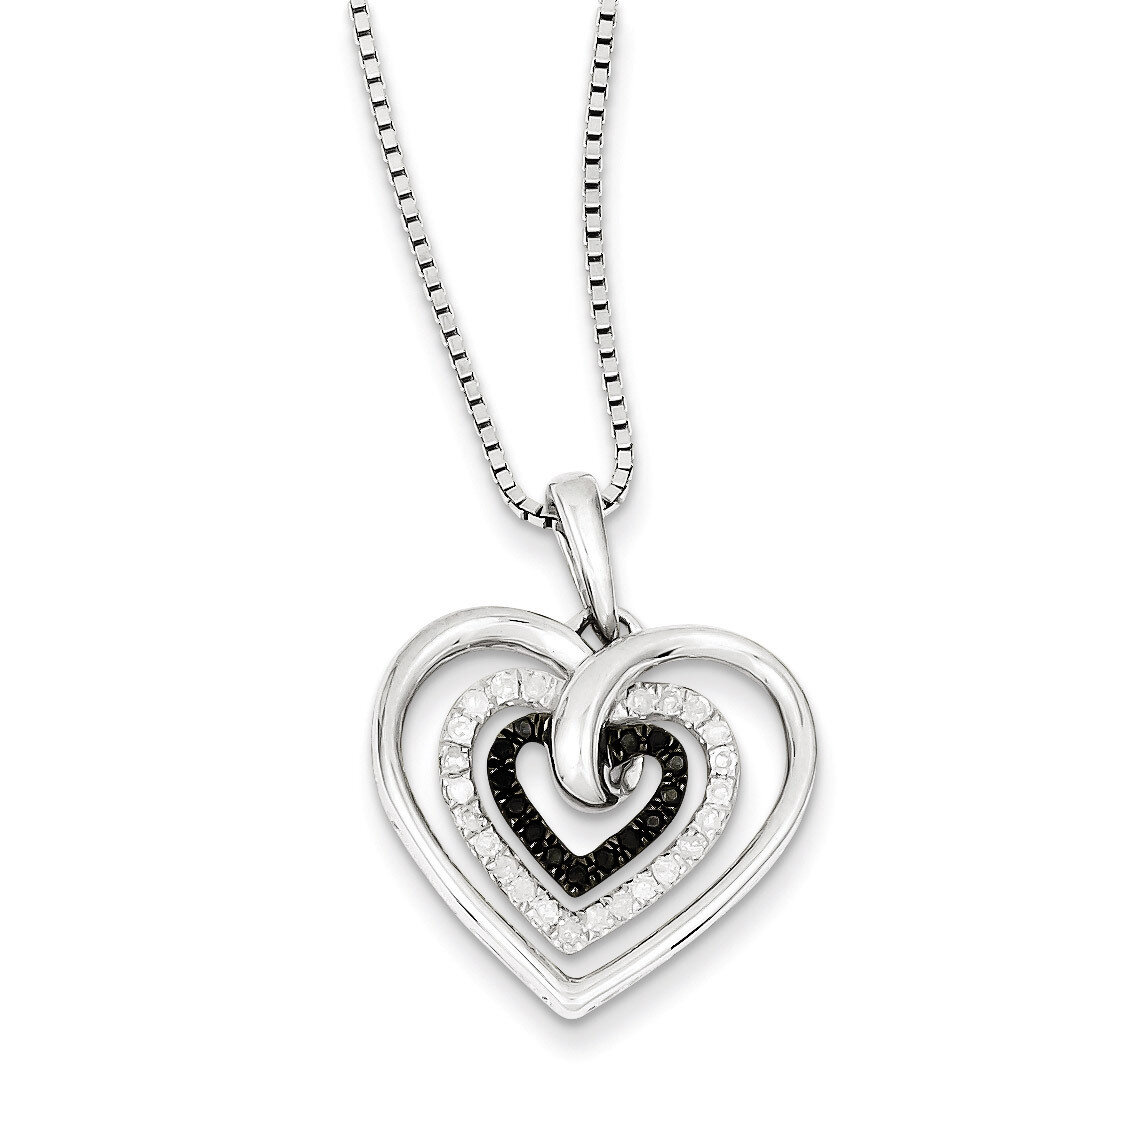 Black and White Diamond Heart Pendant Necklace Sterling Silver QP2309